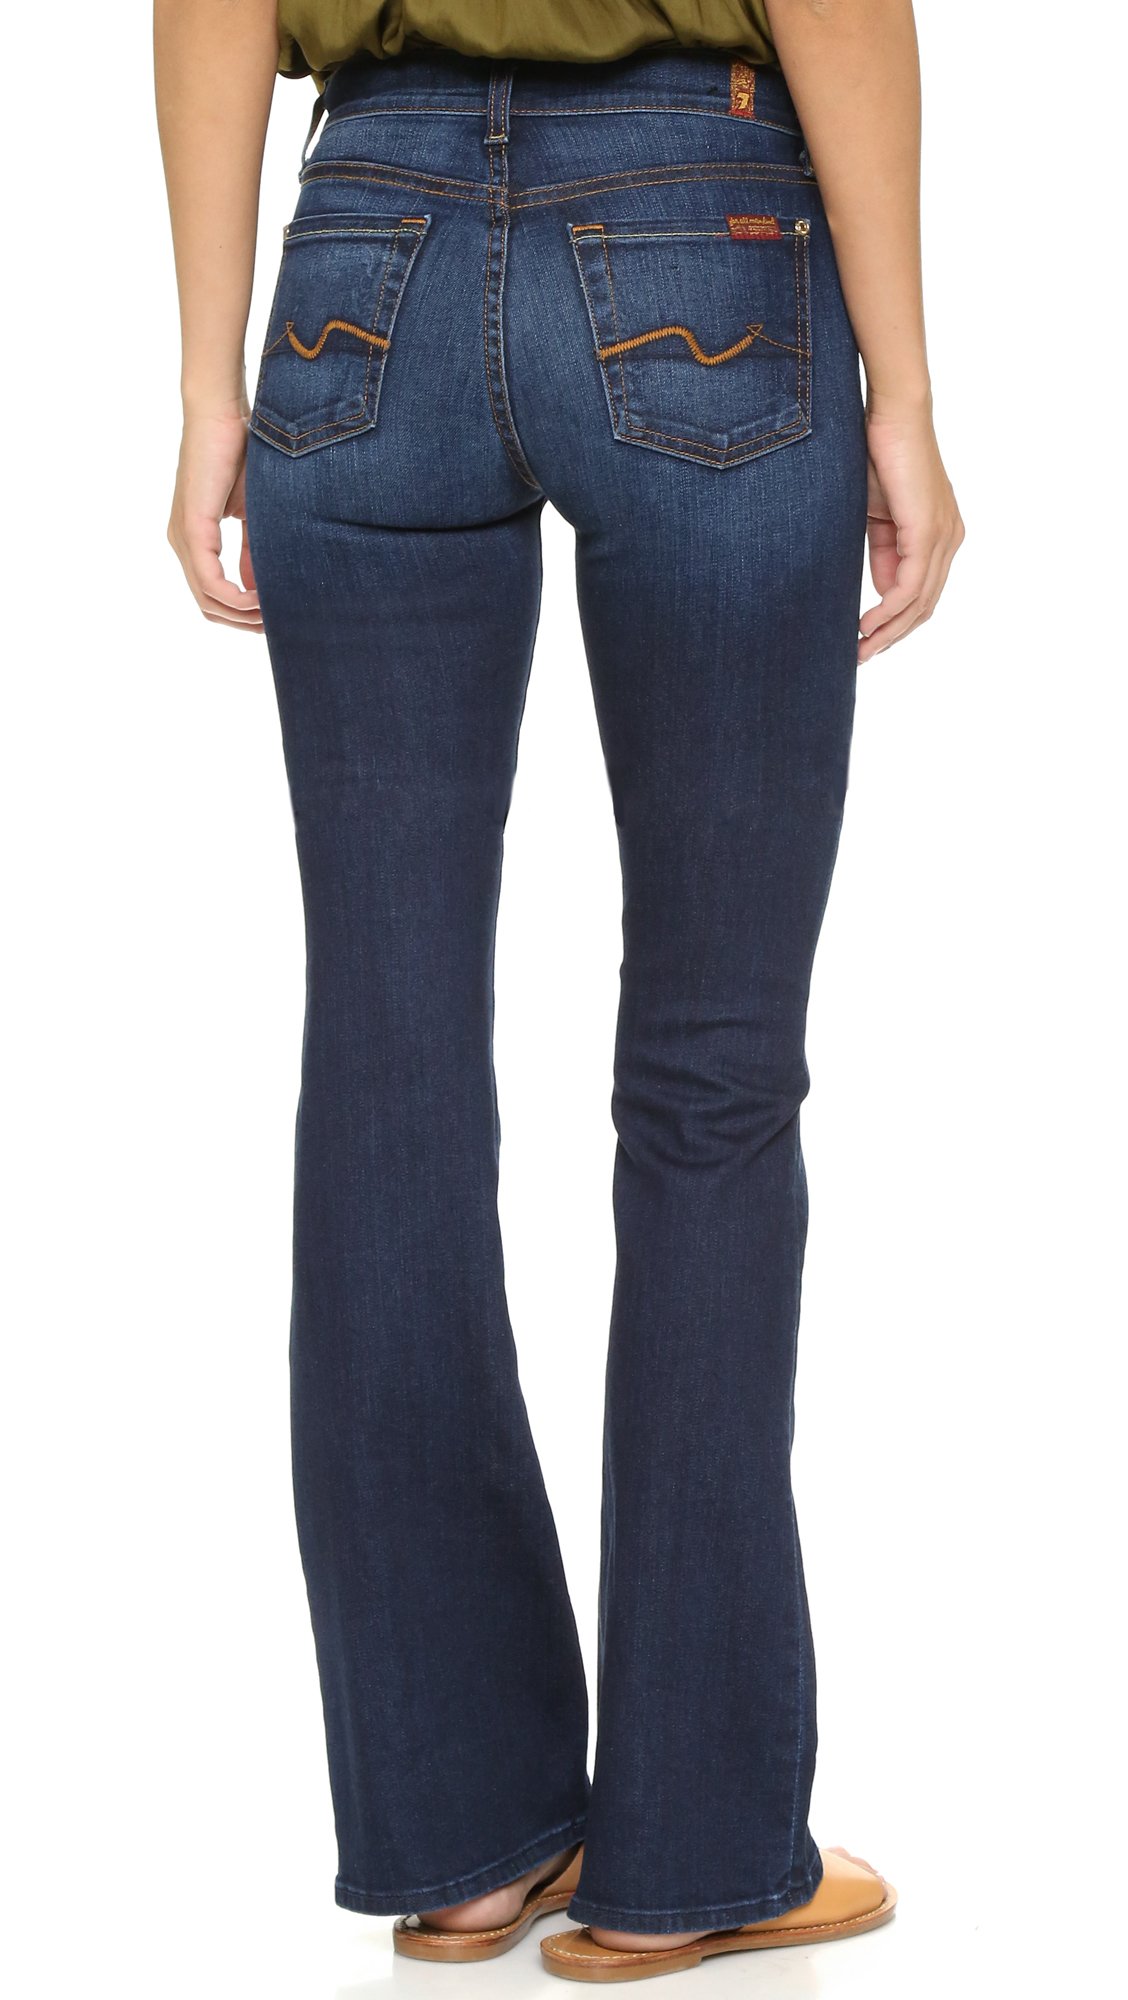 7 For All Mankind New York Dark Iconic Boot Cut Jeans New York Dark Product 4 080903452 Normal 